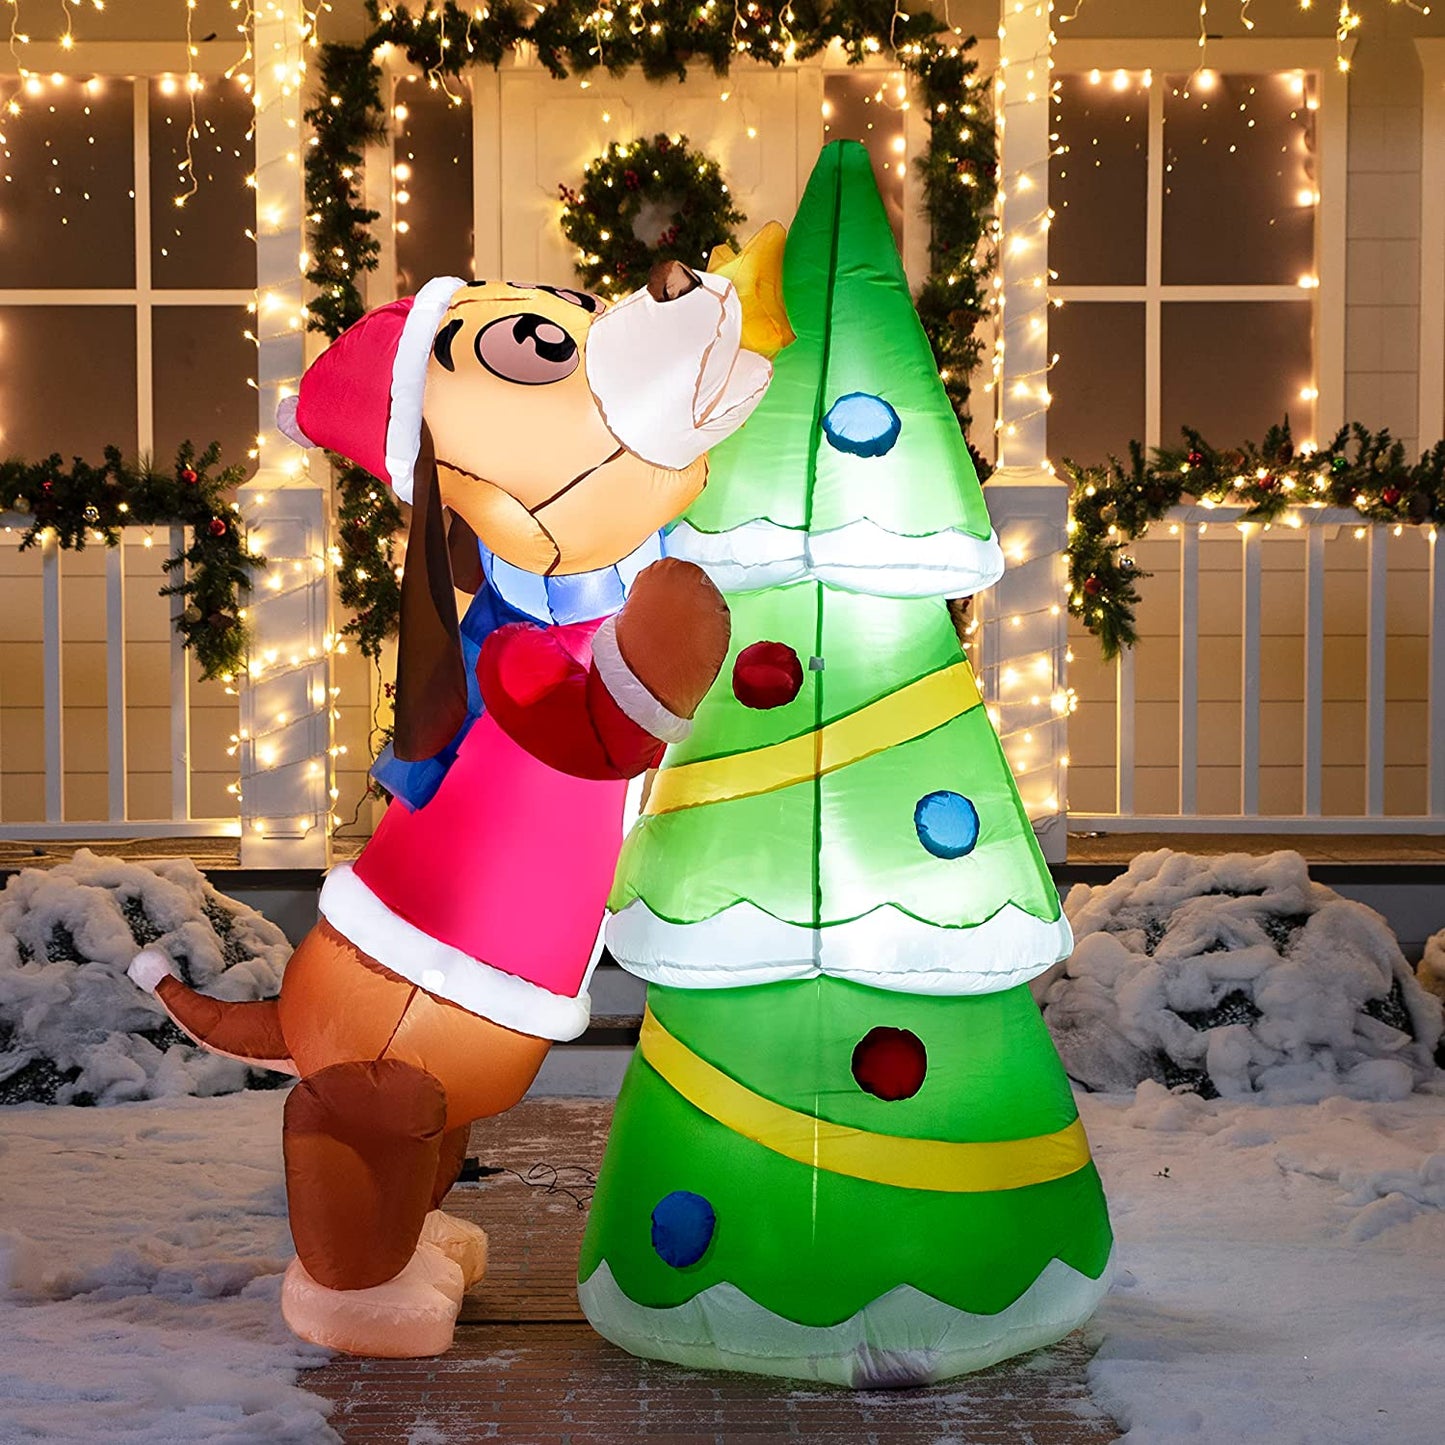 6ft Tall  Puppy Putting a Tree Topper Christmas Inflatable